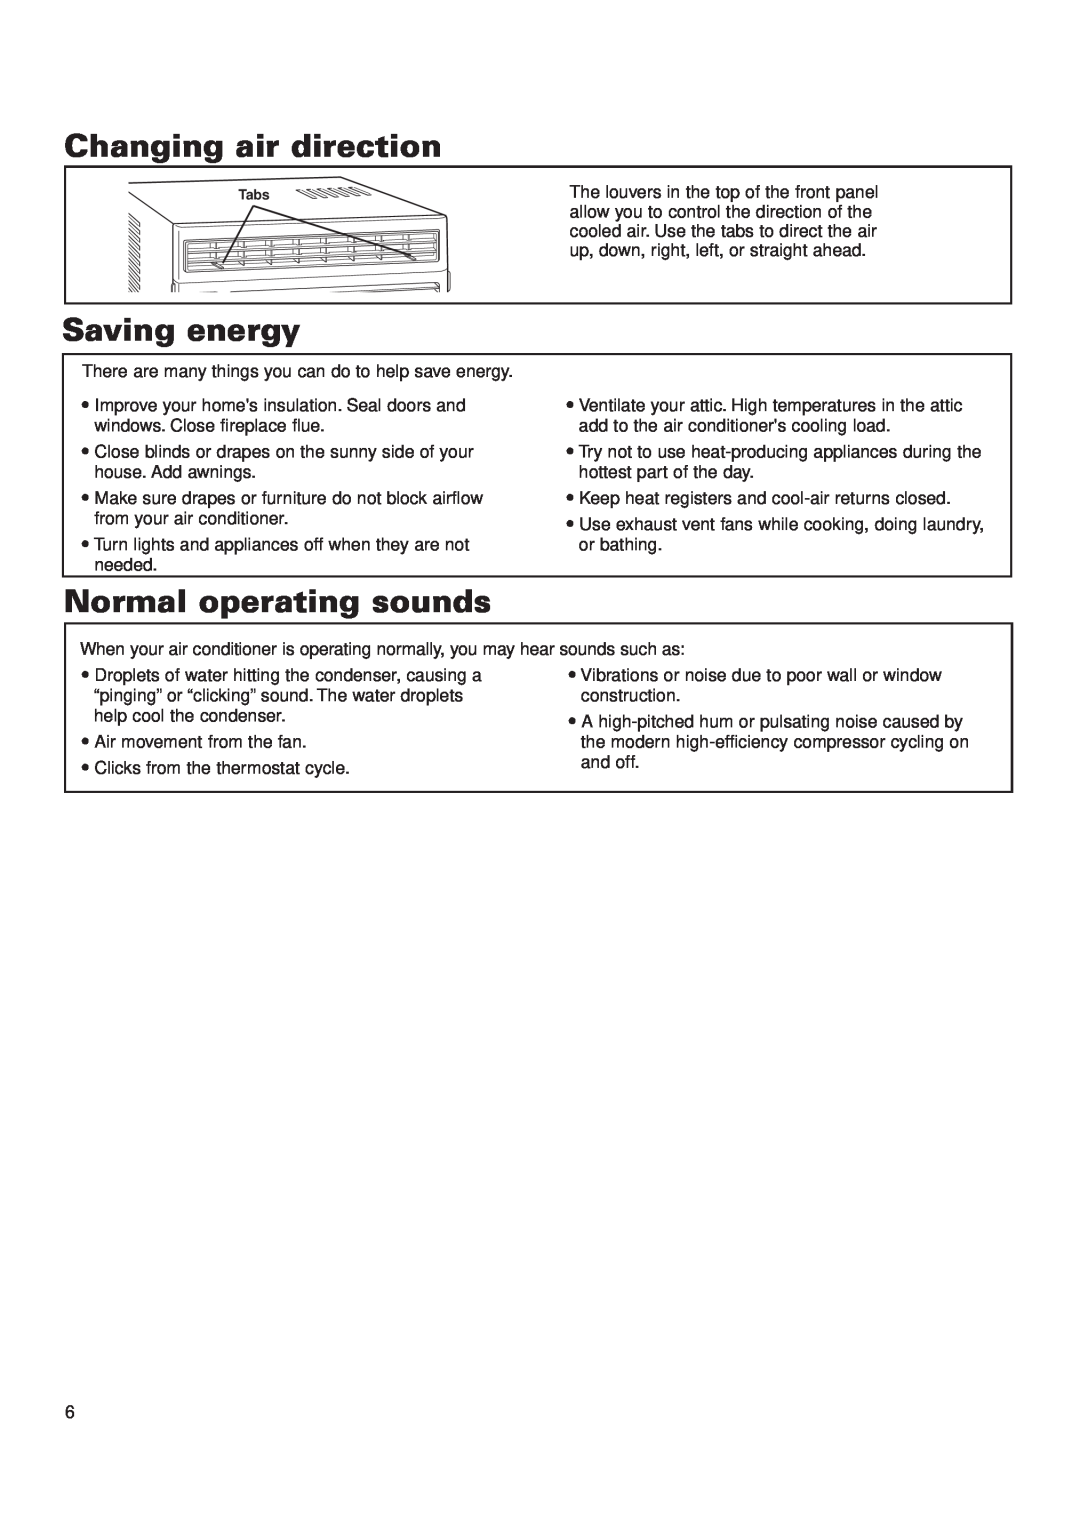 Whirlpool ACQ052PK0 installation instructions Changing air direction, Saving energy, Normal operating sounds 